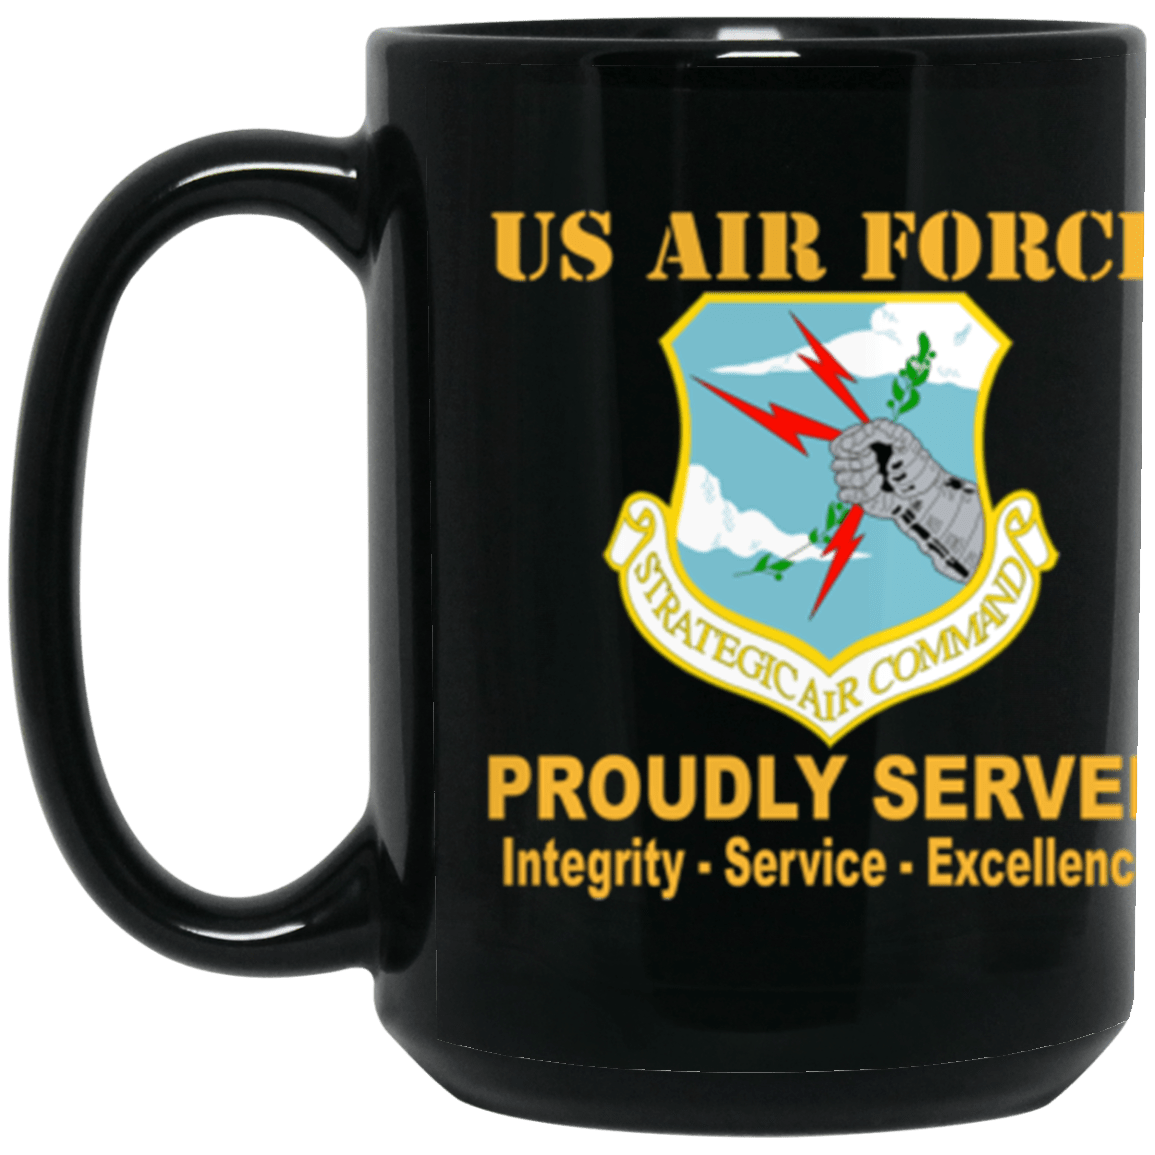 US Air Force Strategic Air Command Proudly Served Core Values 15 oz